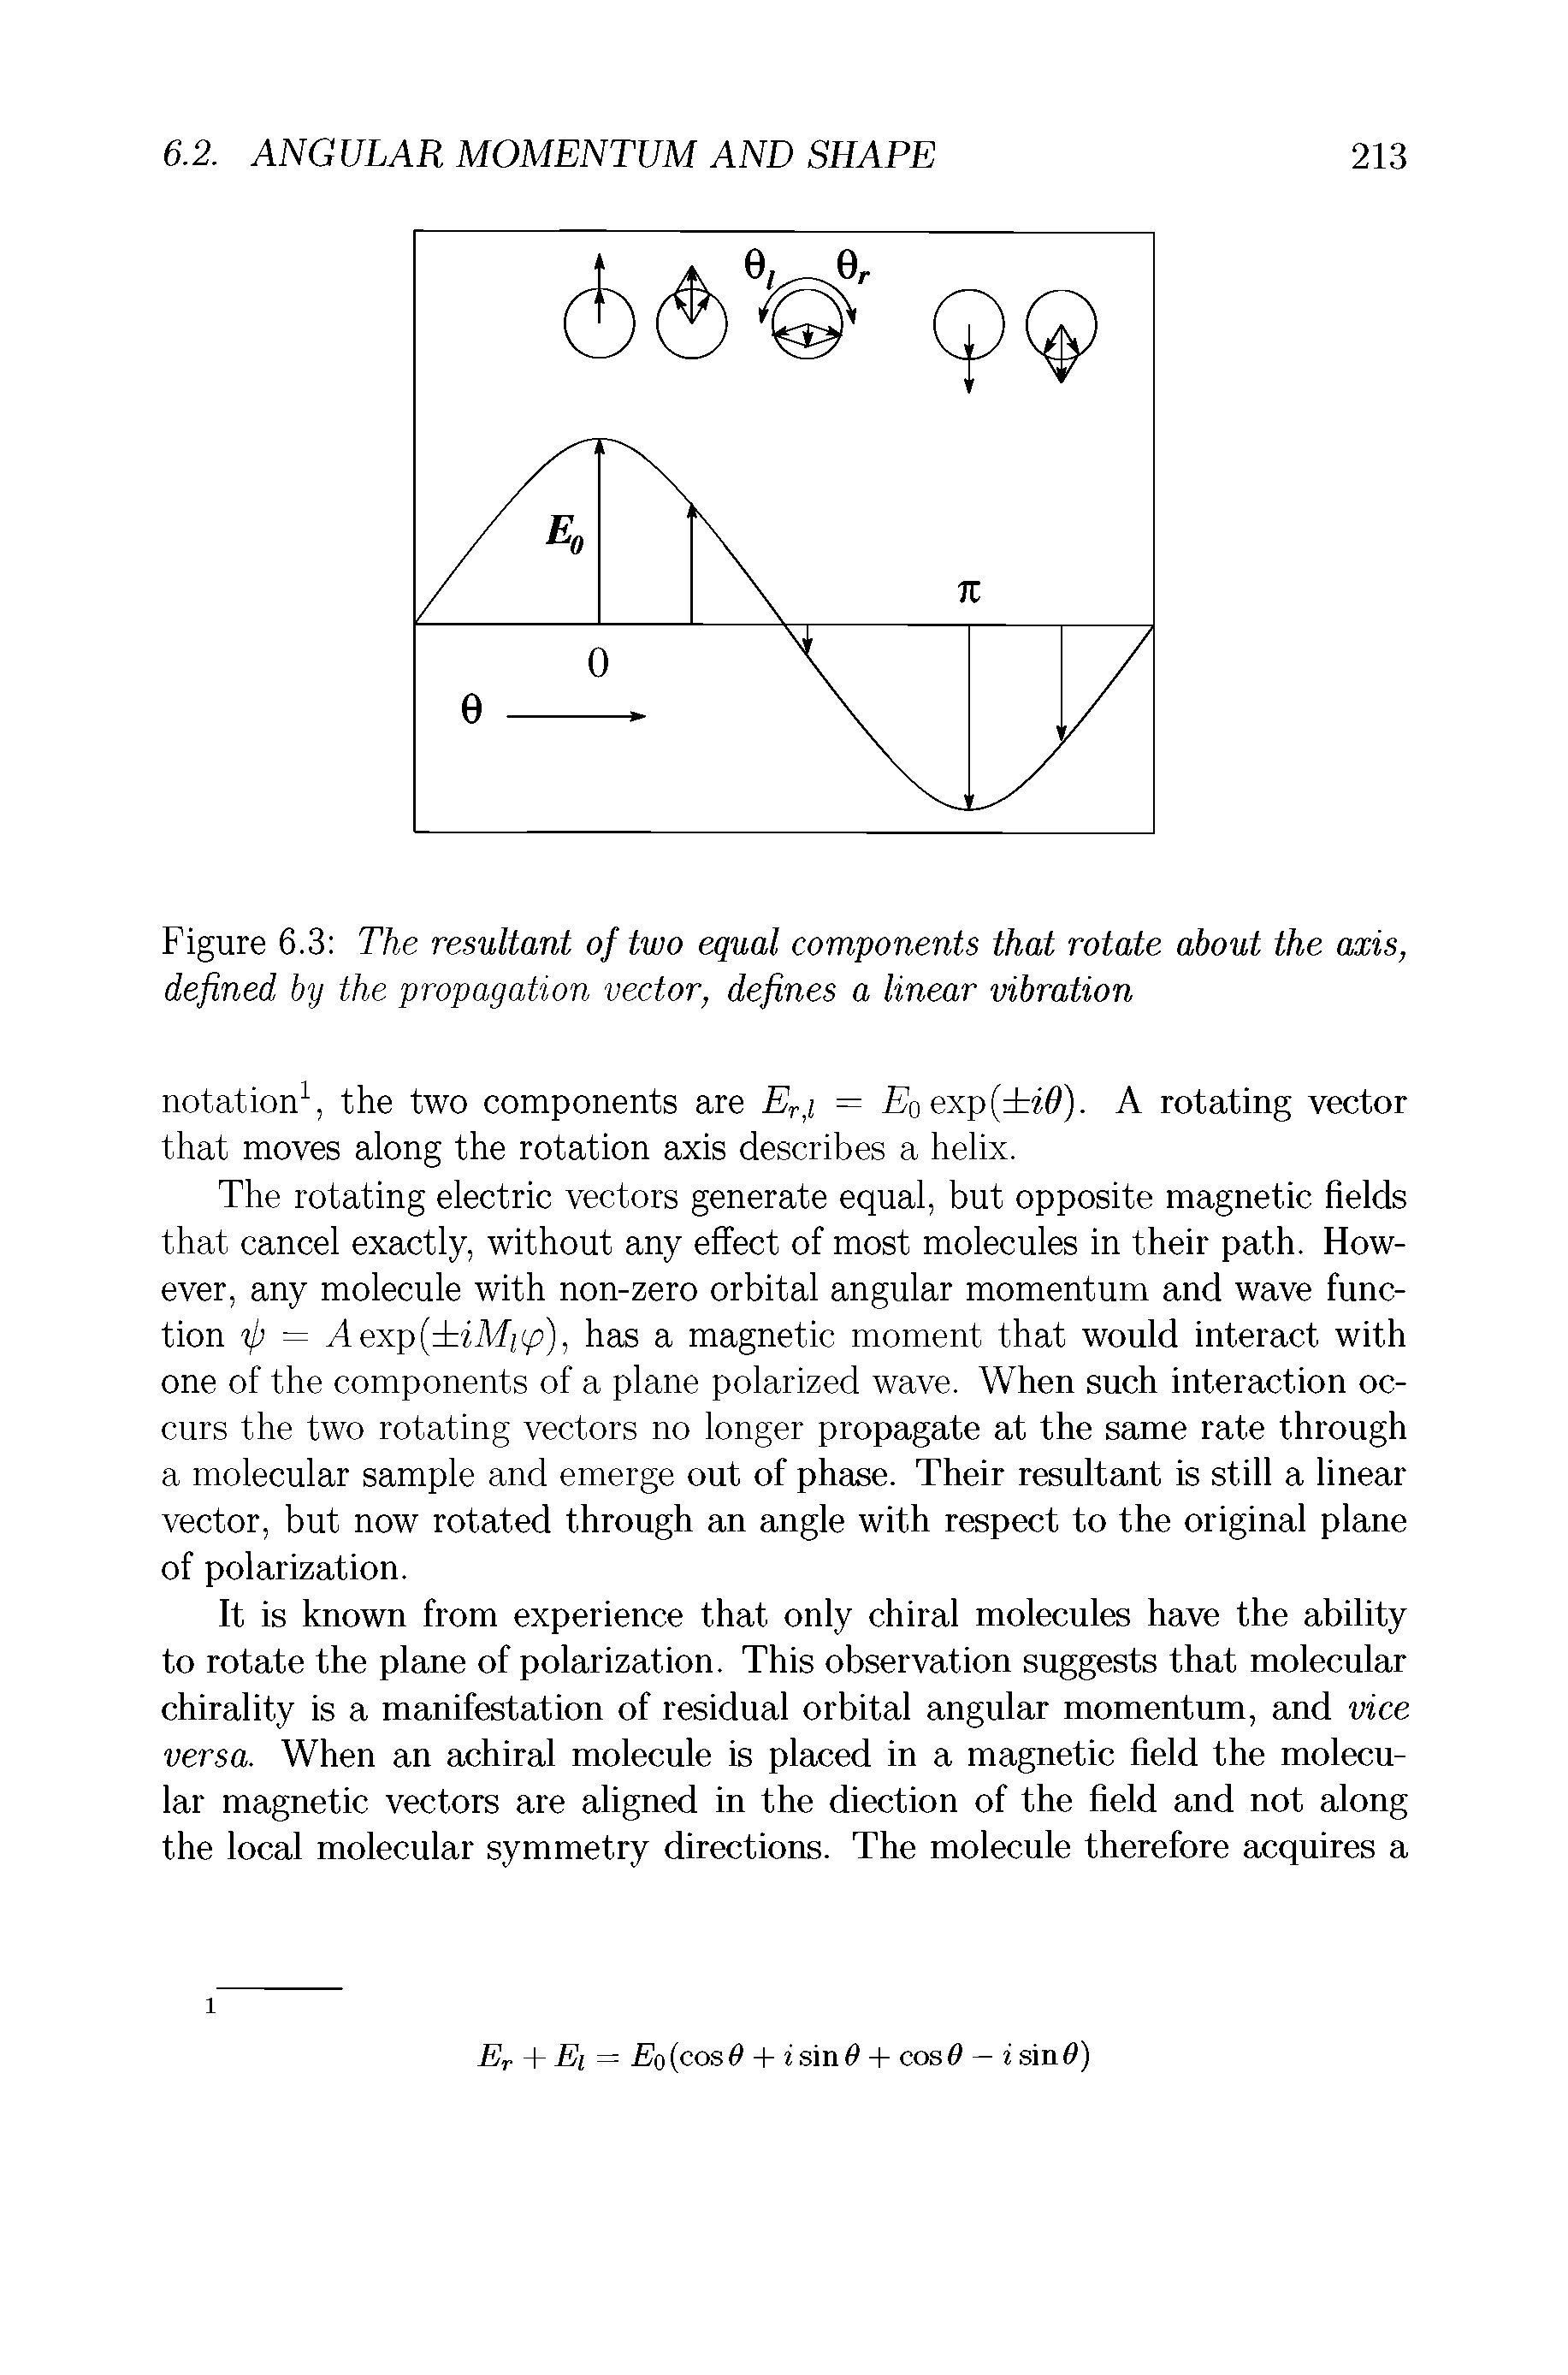 Figure 6.3 The resultant of two equal components that rotate about the axis, defined by the propagation vector, defines a linear vibration...